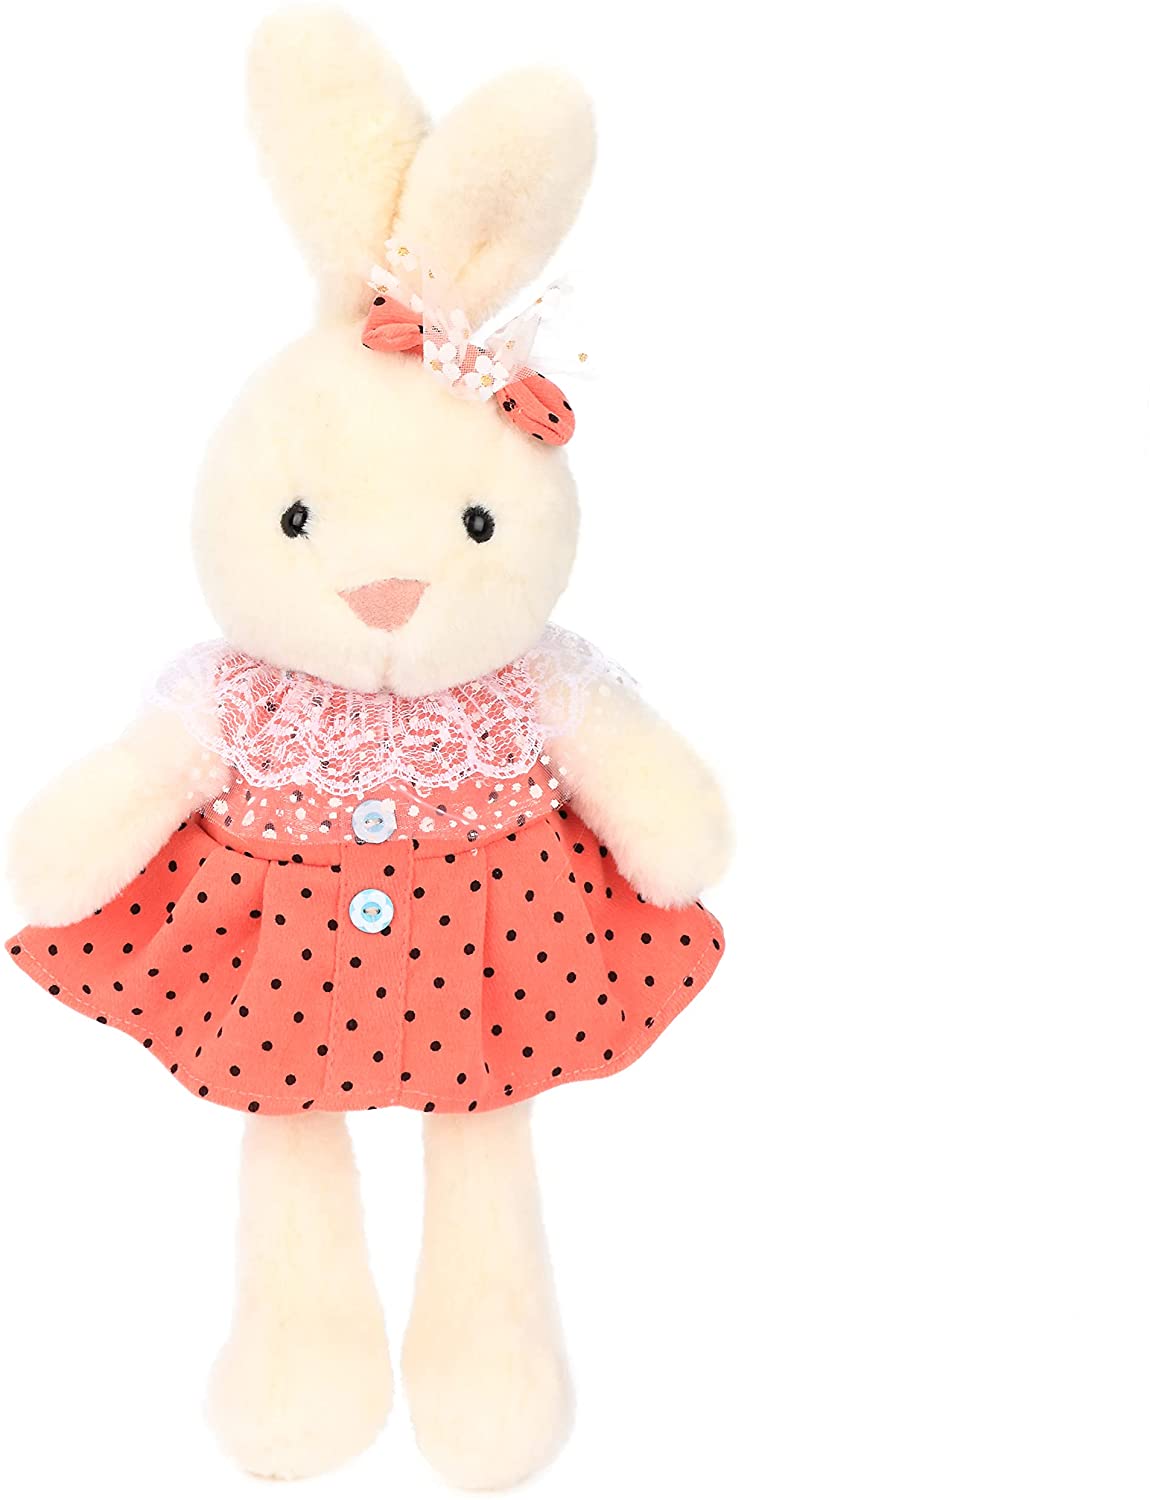 Soft lace dress rabbit stuffed plush animal bunny toy for baby girl kid gift~toy 